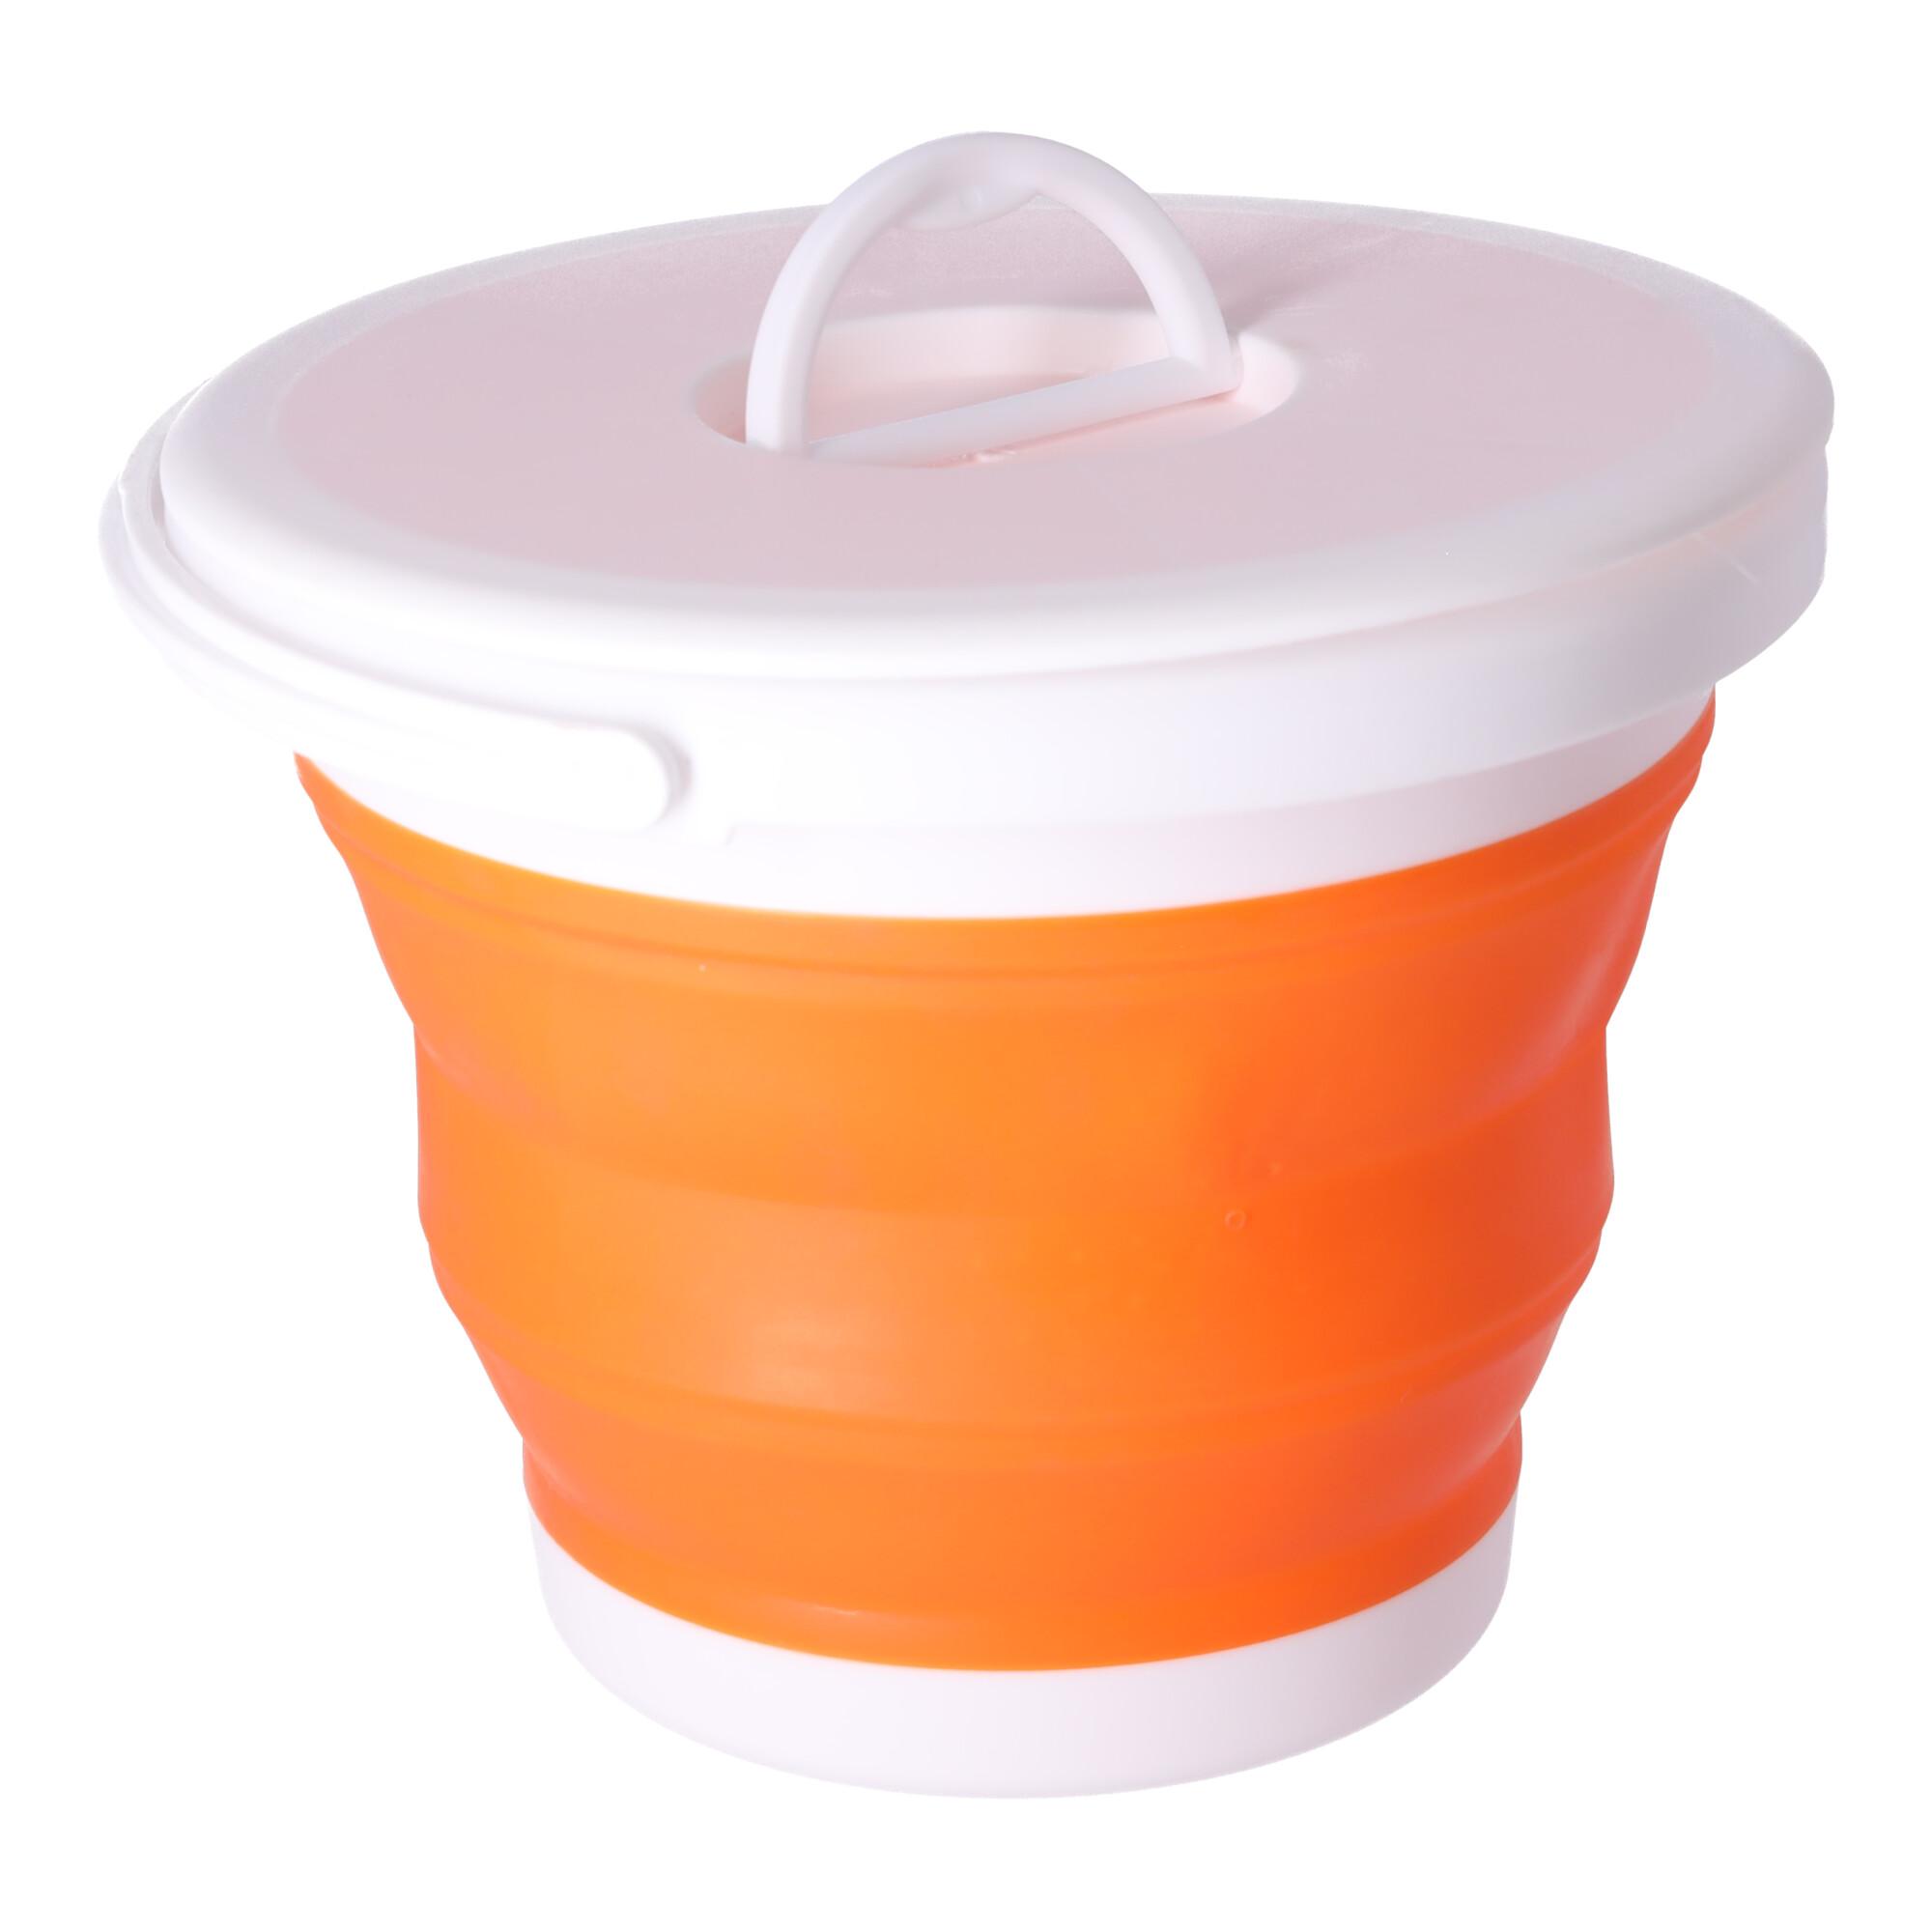 Silicone bucket 5L foldable - orange and white (with a lid)